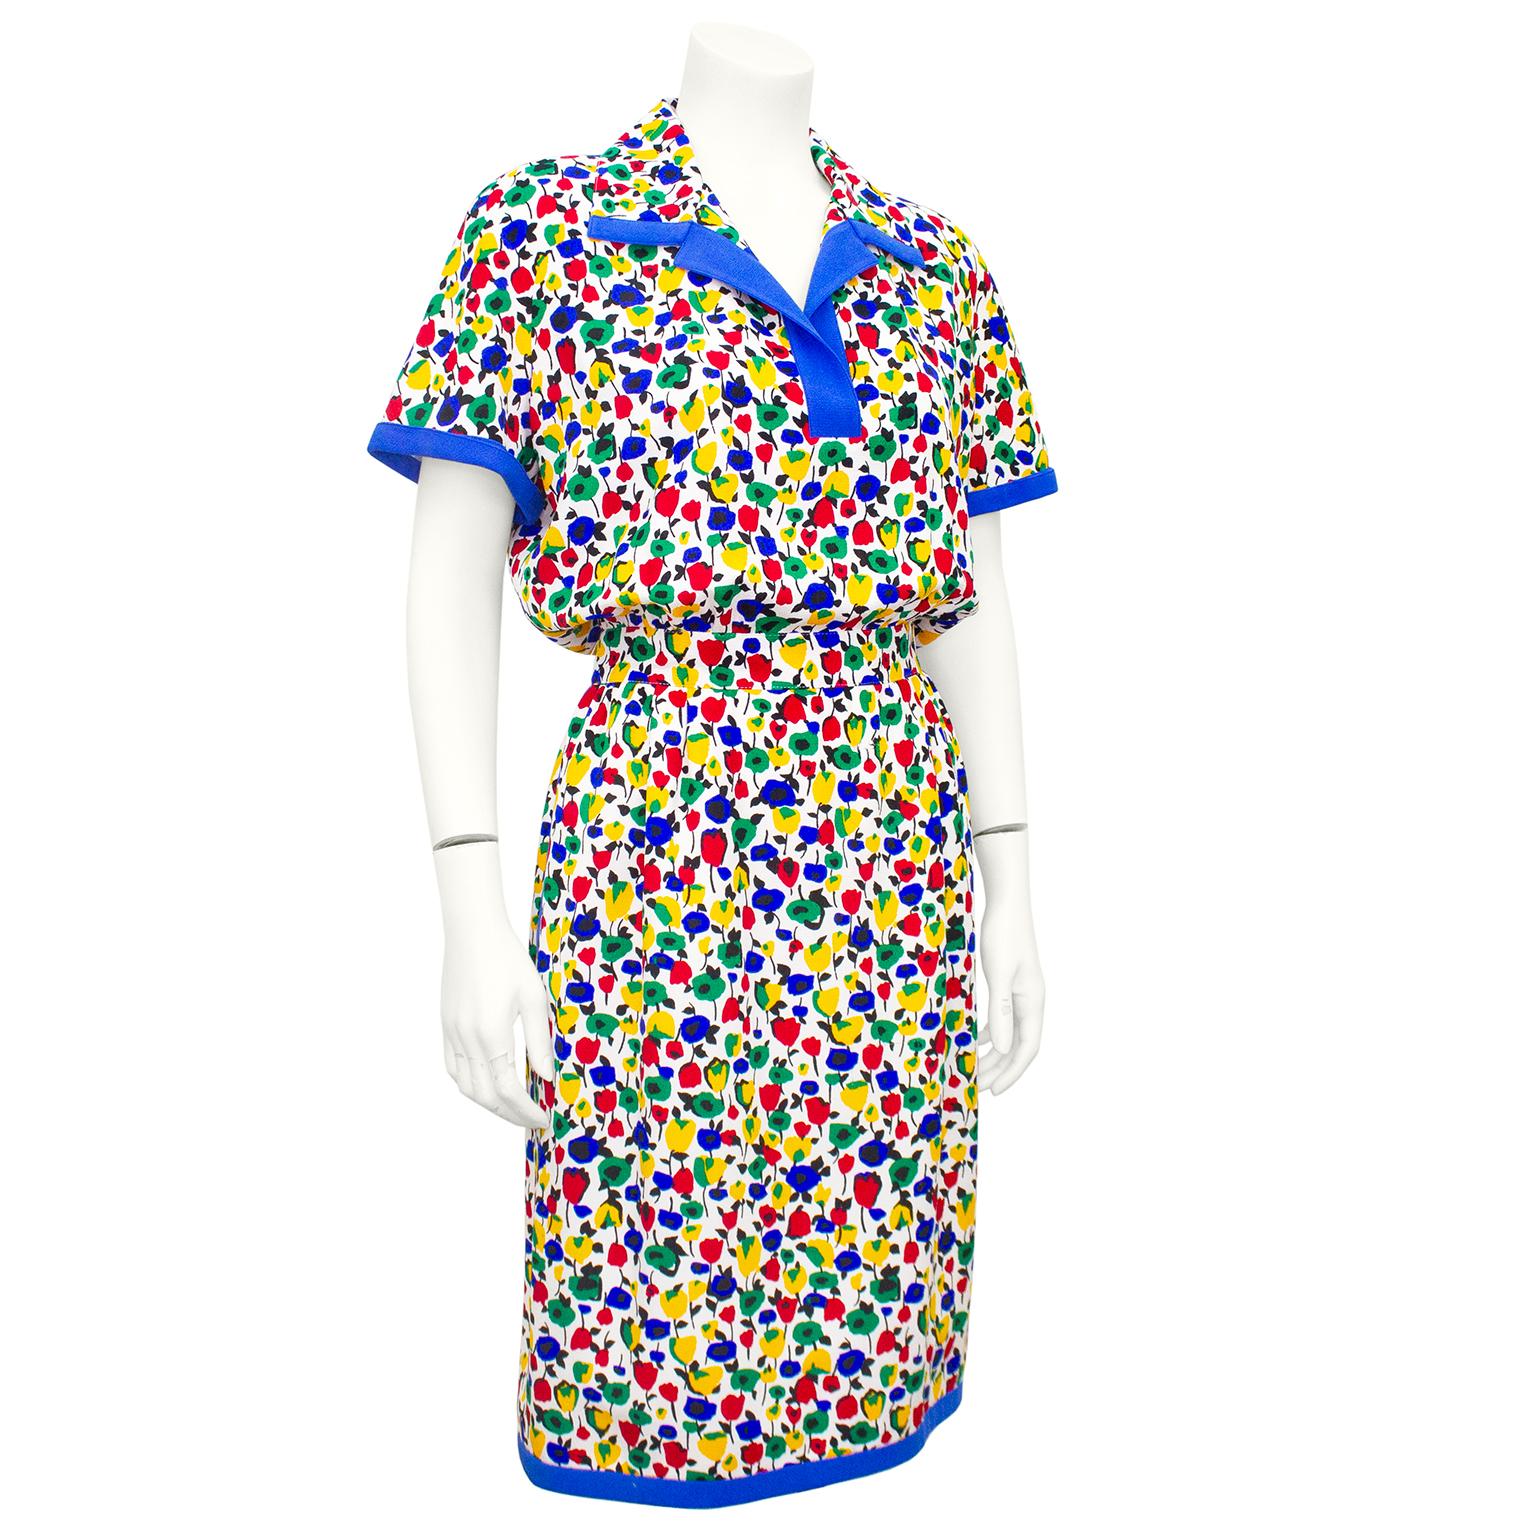 1980s Valentino summer shirt dress. White with all over red, blue, green and yellow flowers with black stems and leaves. Thick blue trim. Notched collar with open v neck, short rolled sleeves and pockets. Top is loose through the body and skirt is